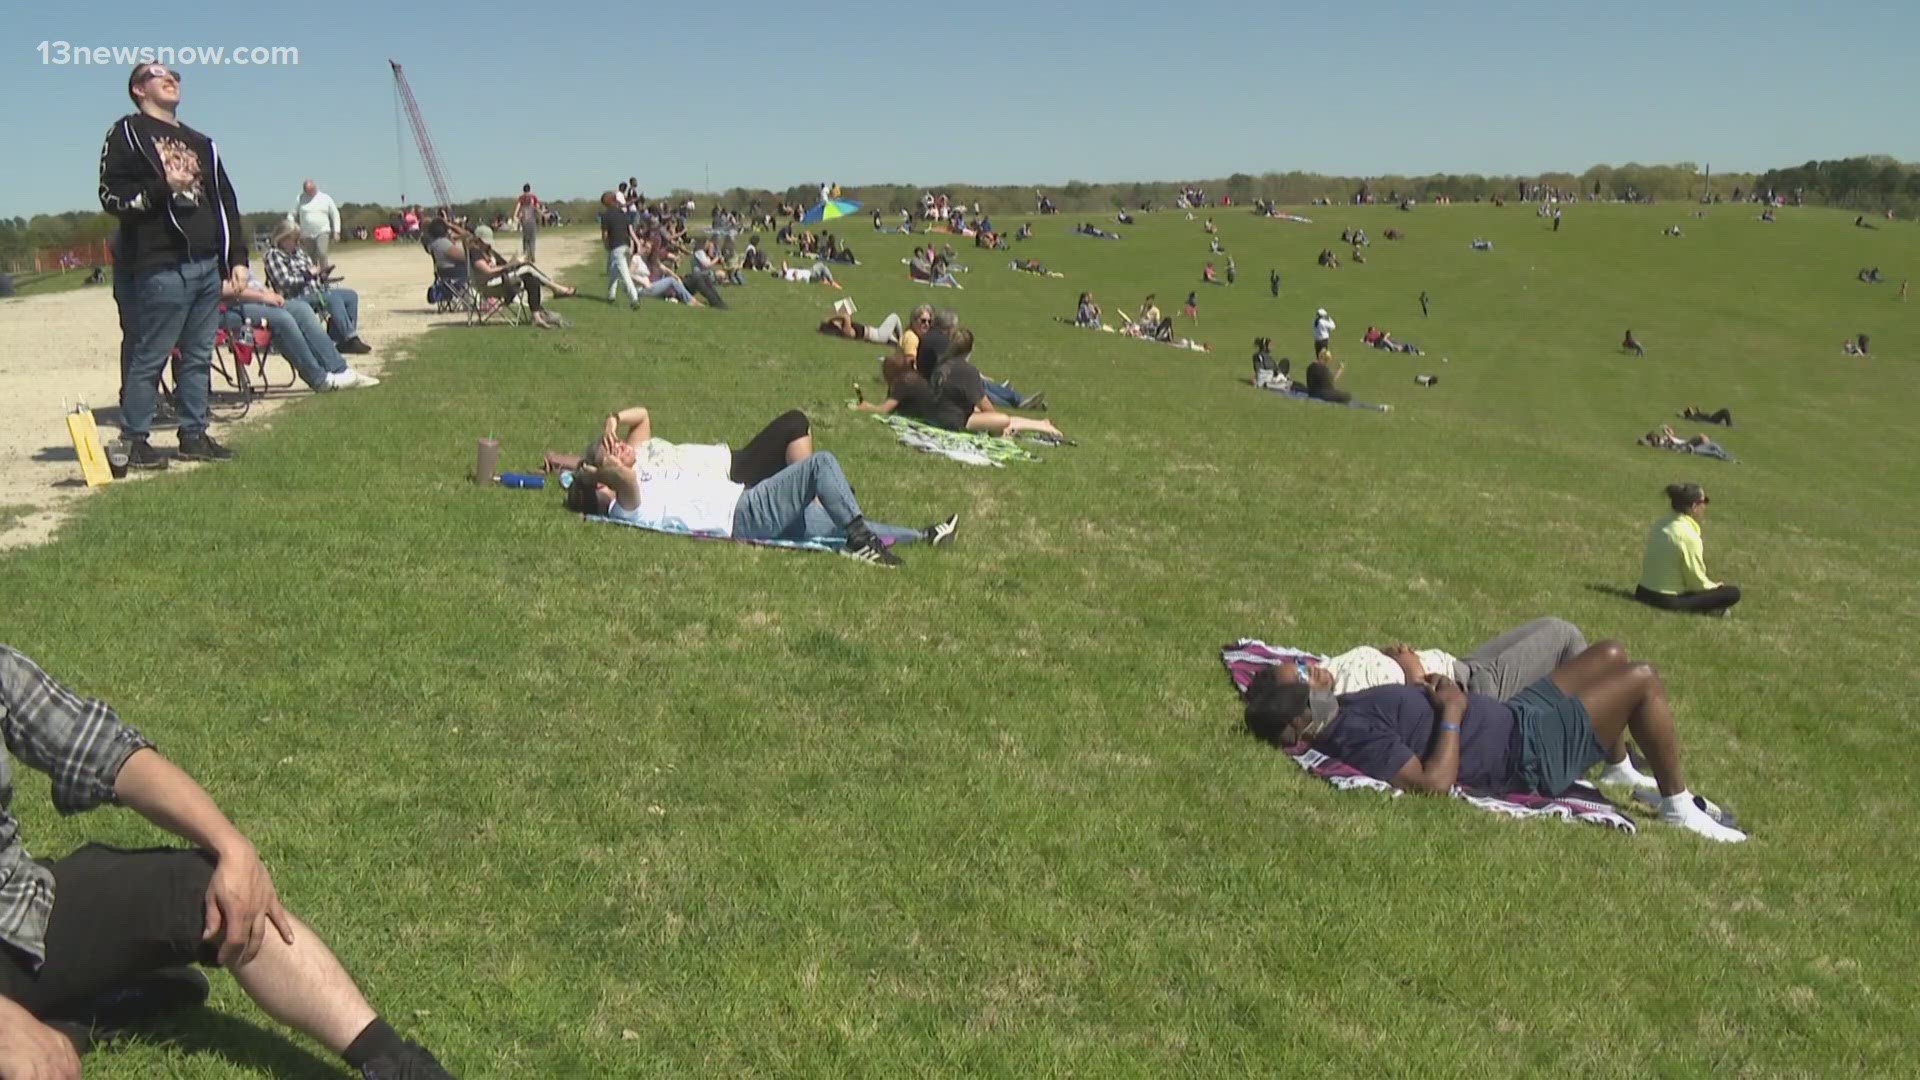 Dozens of spectators gathered at Mount Trashmore in Virginia Beach for the April 8, 2024 solar eclipse.